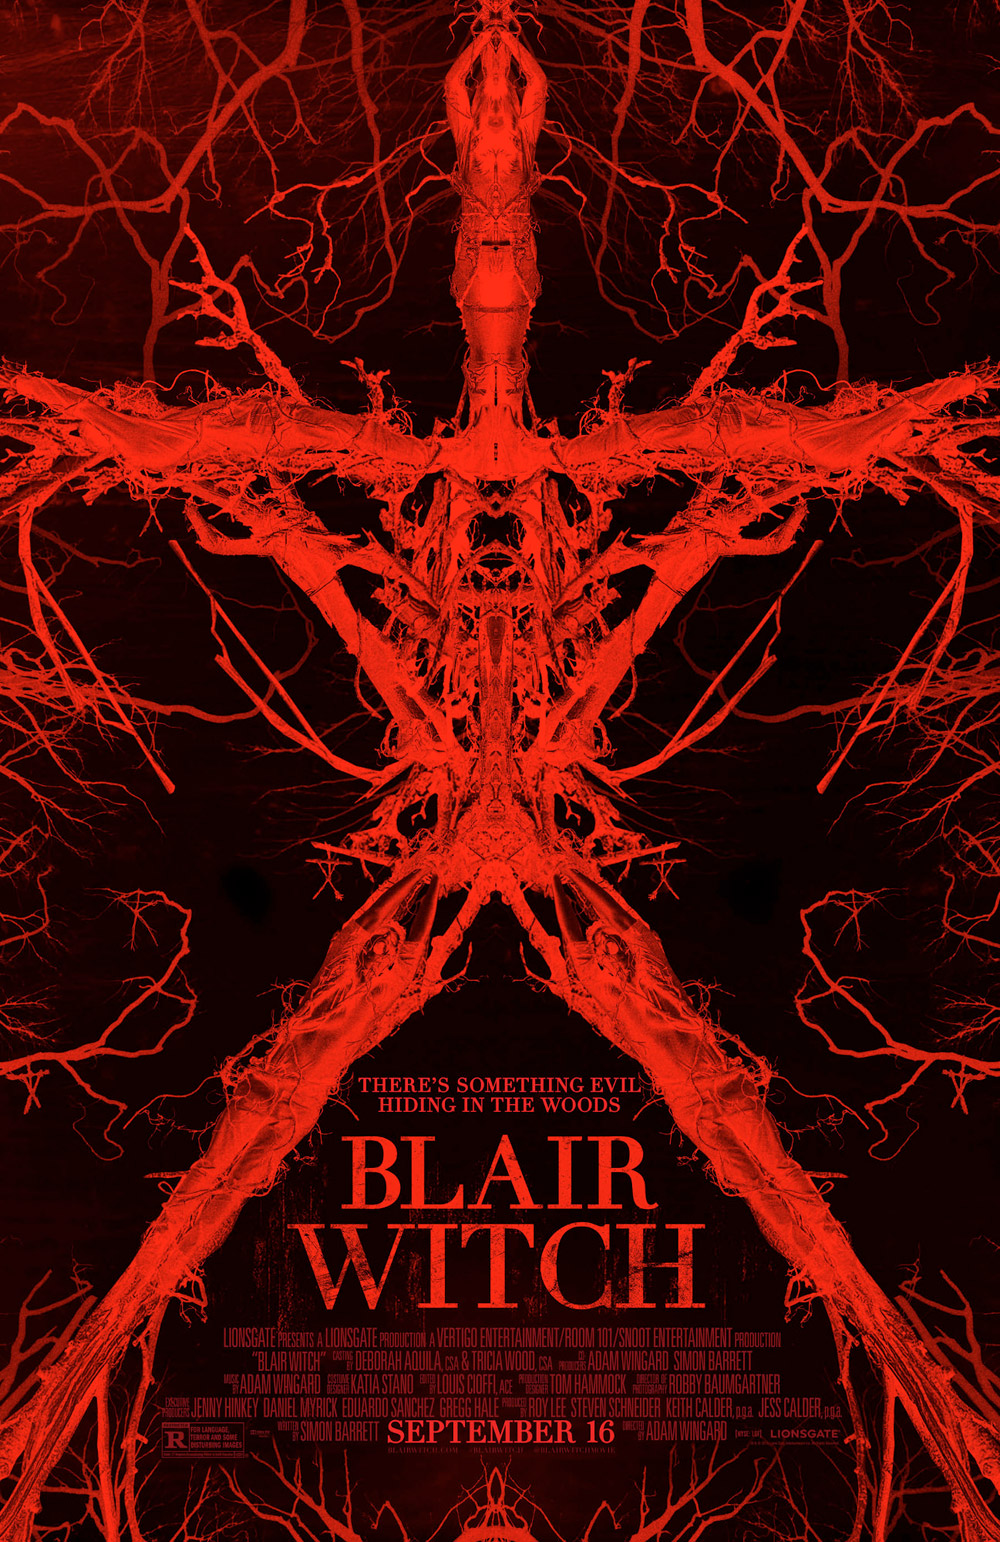 Blair Witch Art 2 - New Blair Witch Images Head into the Woods